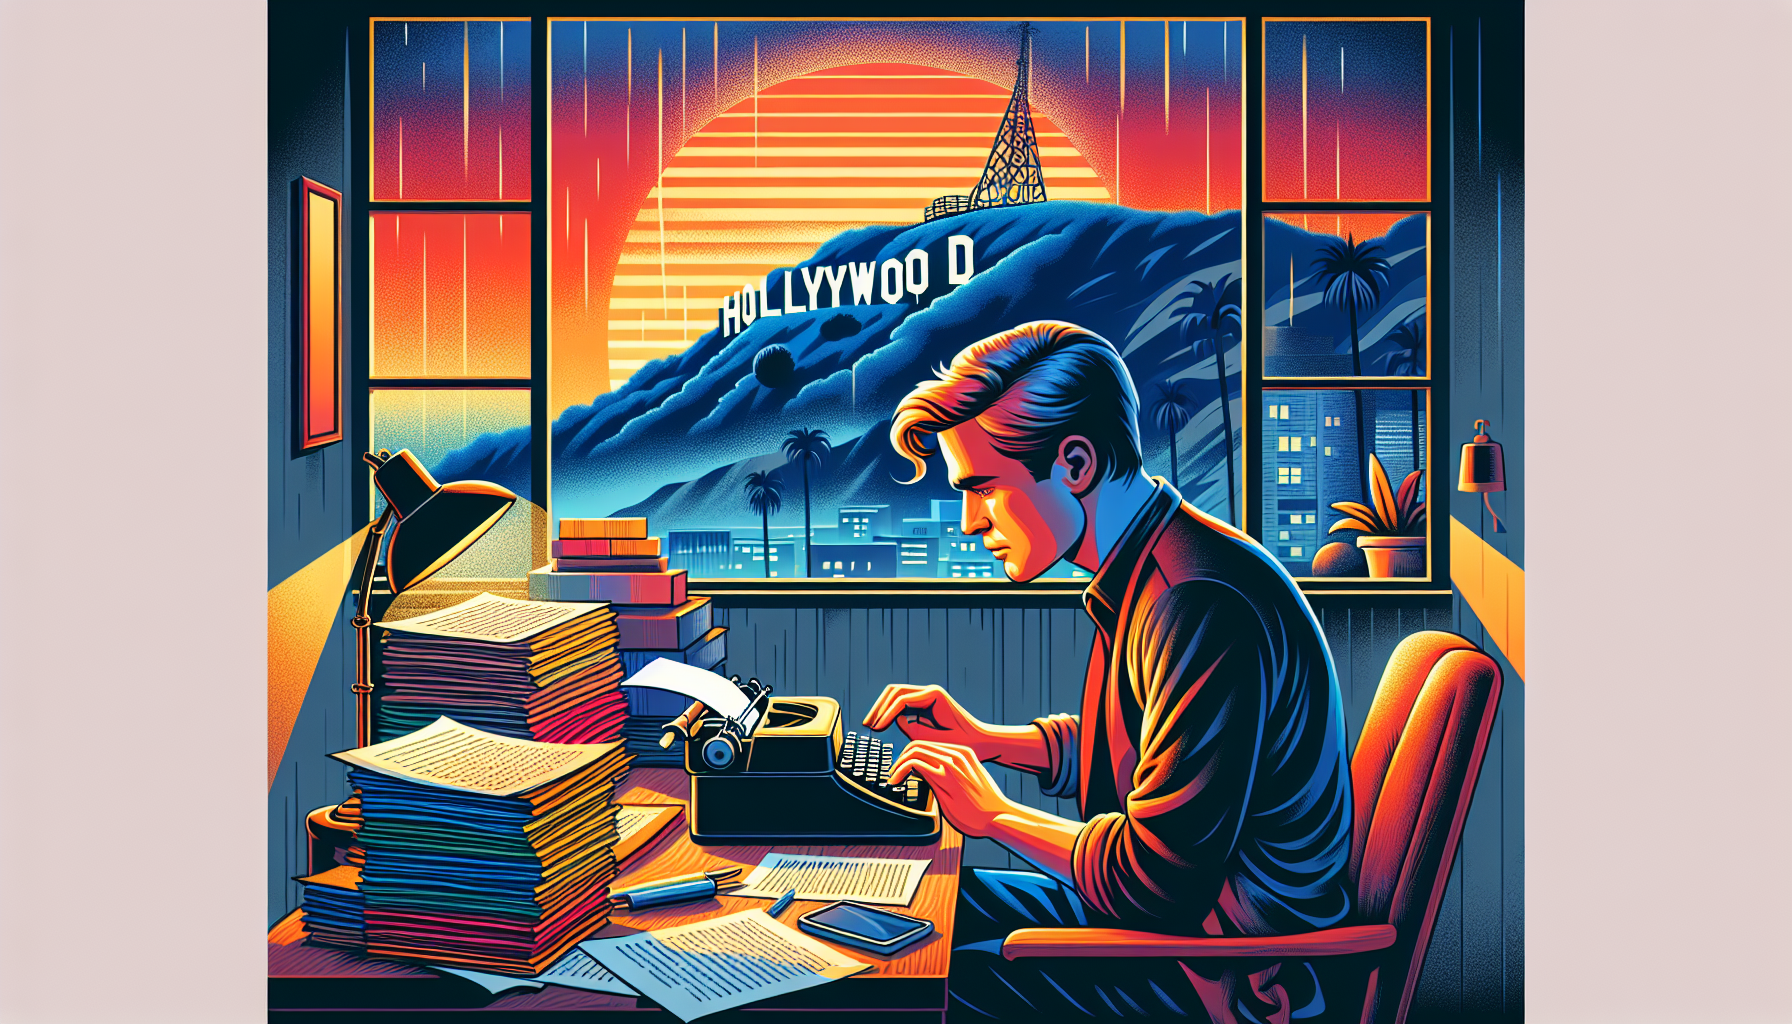 An artistic depiction of a screenwriter at work in a cozy, dimly lit study, surrounded by piles of scripts and movie posters, intently typing on an old-fashioned typewriter with a window showing a Hol